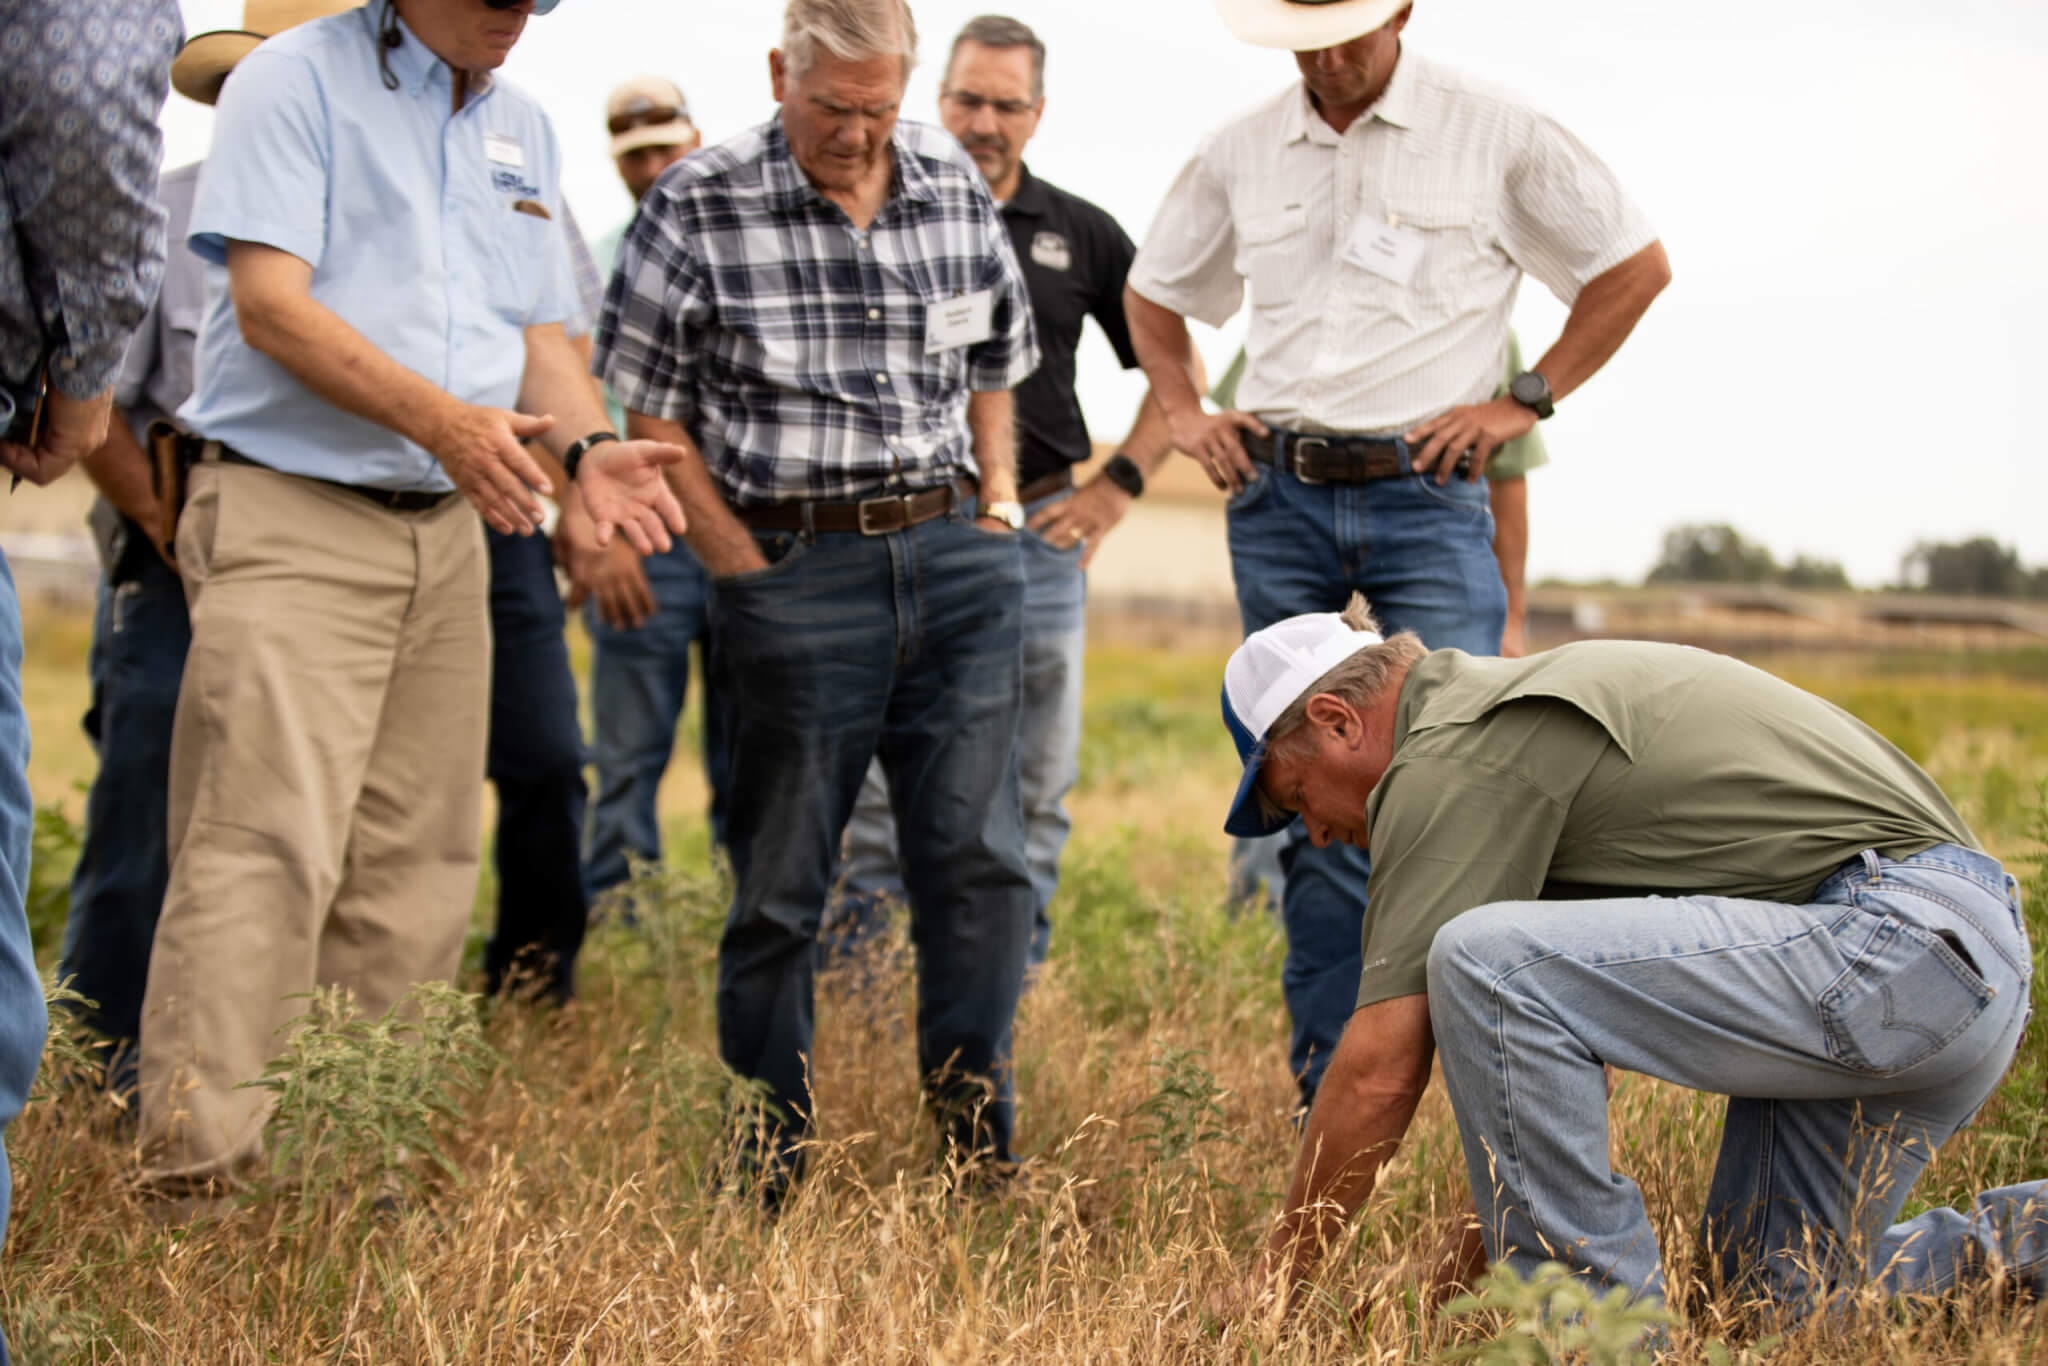 Noble Research Institute course facilitator Mike Porter conducts a hands-on session in the field to with course participants to demonstrate regenerative principles and practices. 